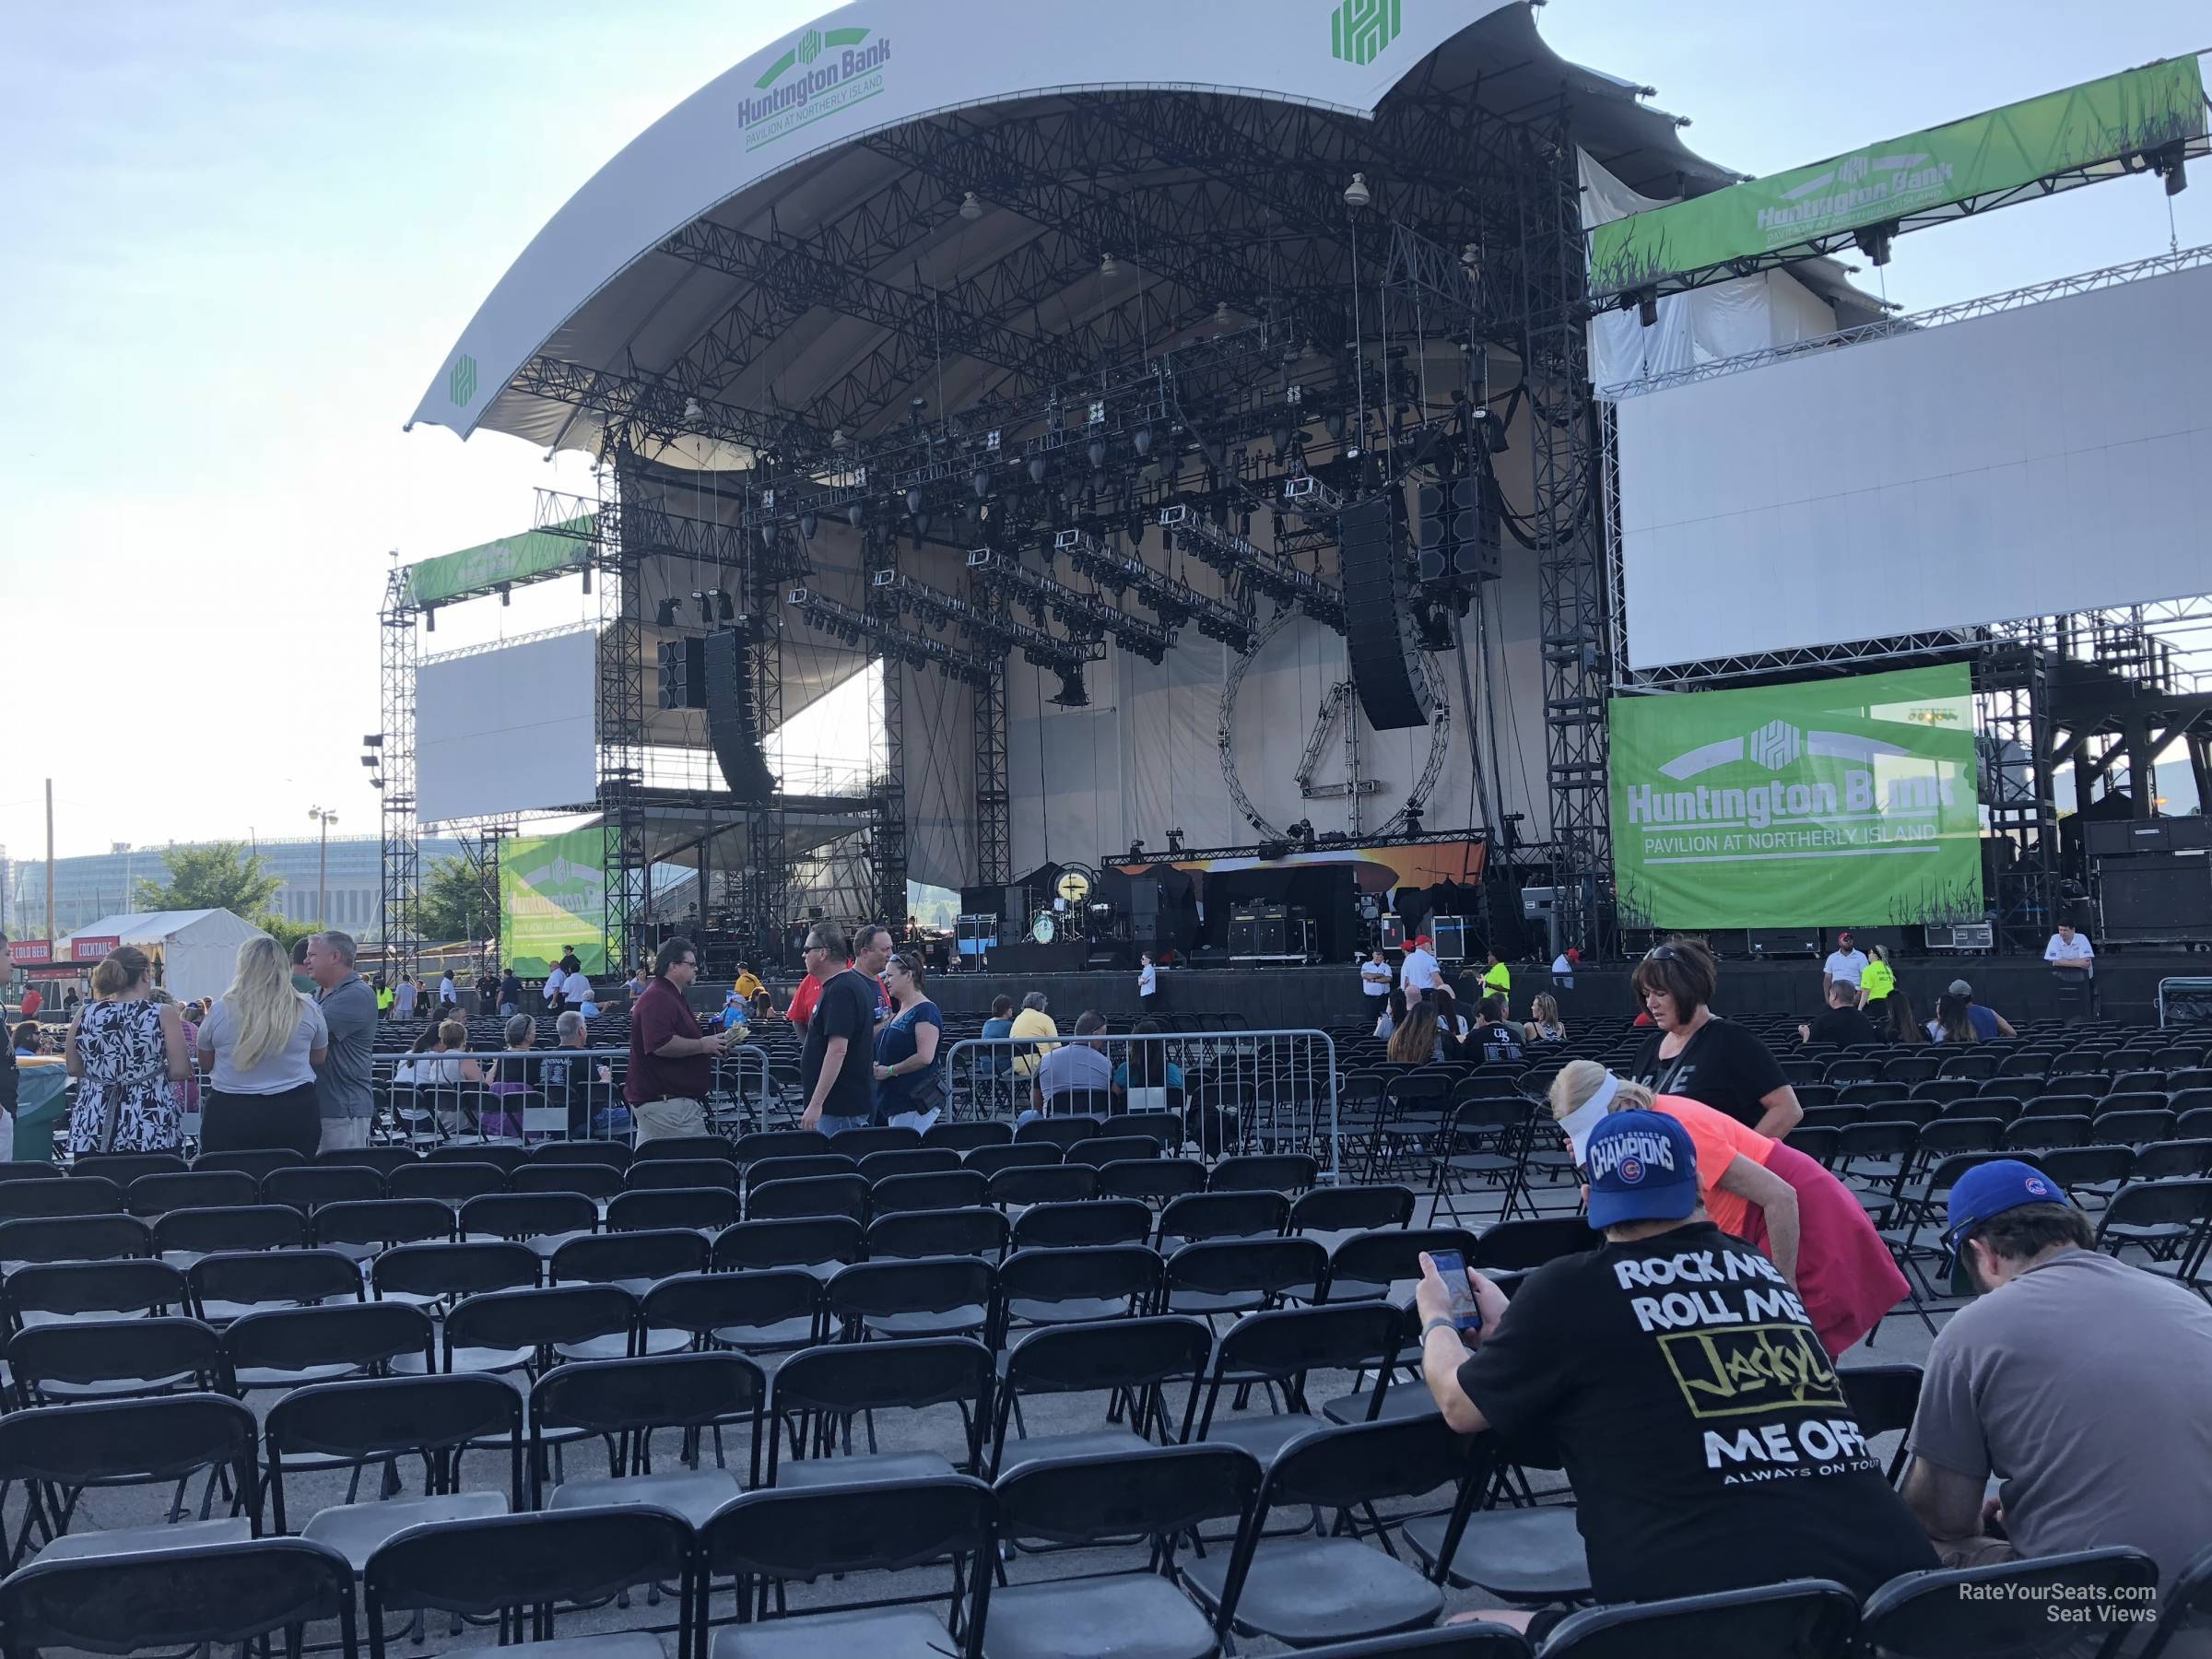 section 202, row l seat view  - huntington bank pavilion (at northerly island)